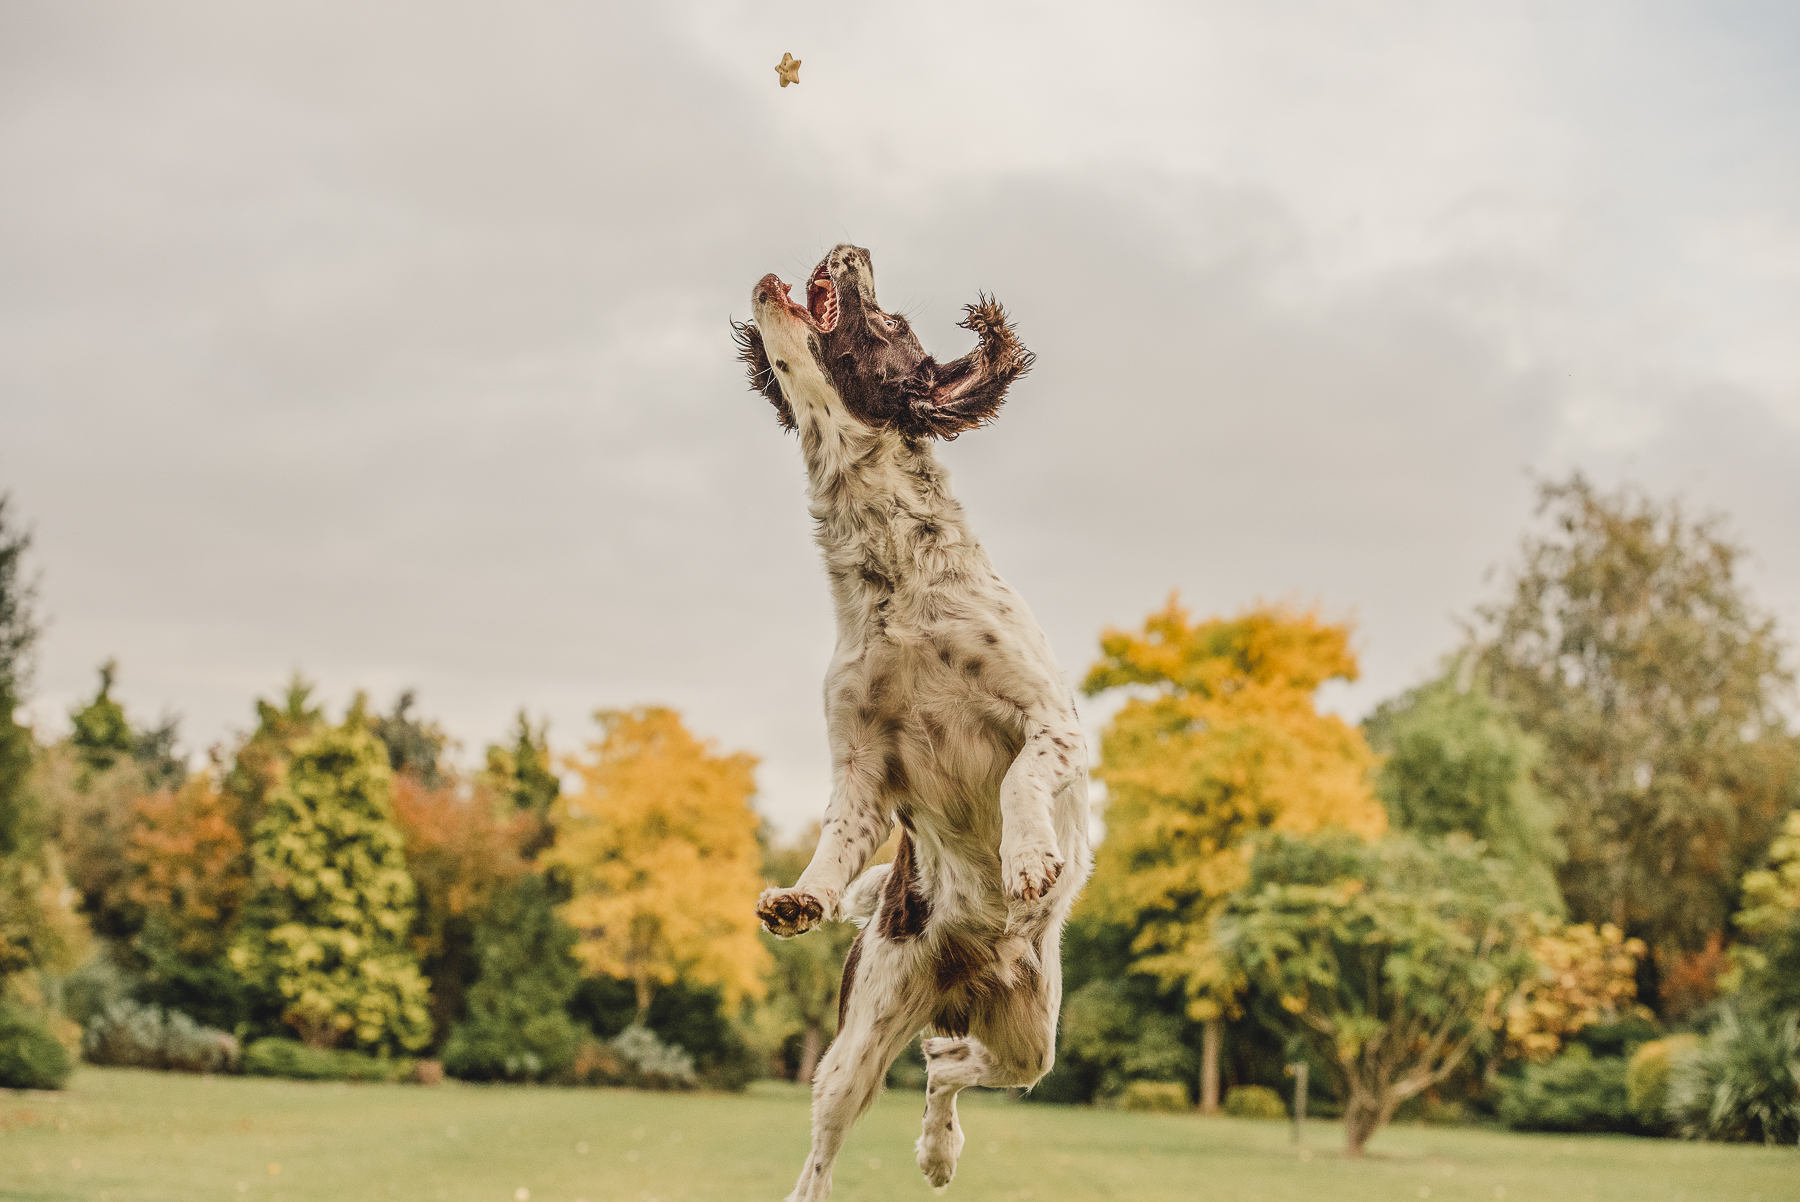 Spaniel jumping in the air for a treat